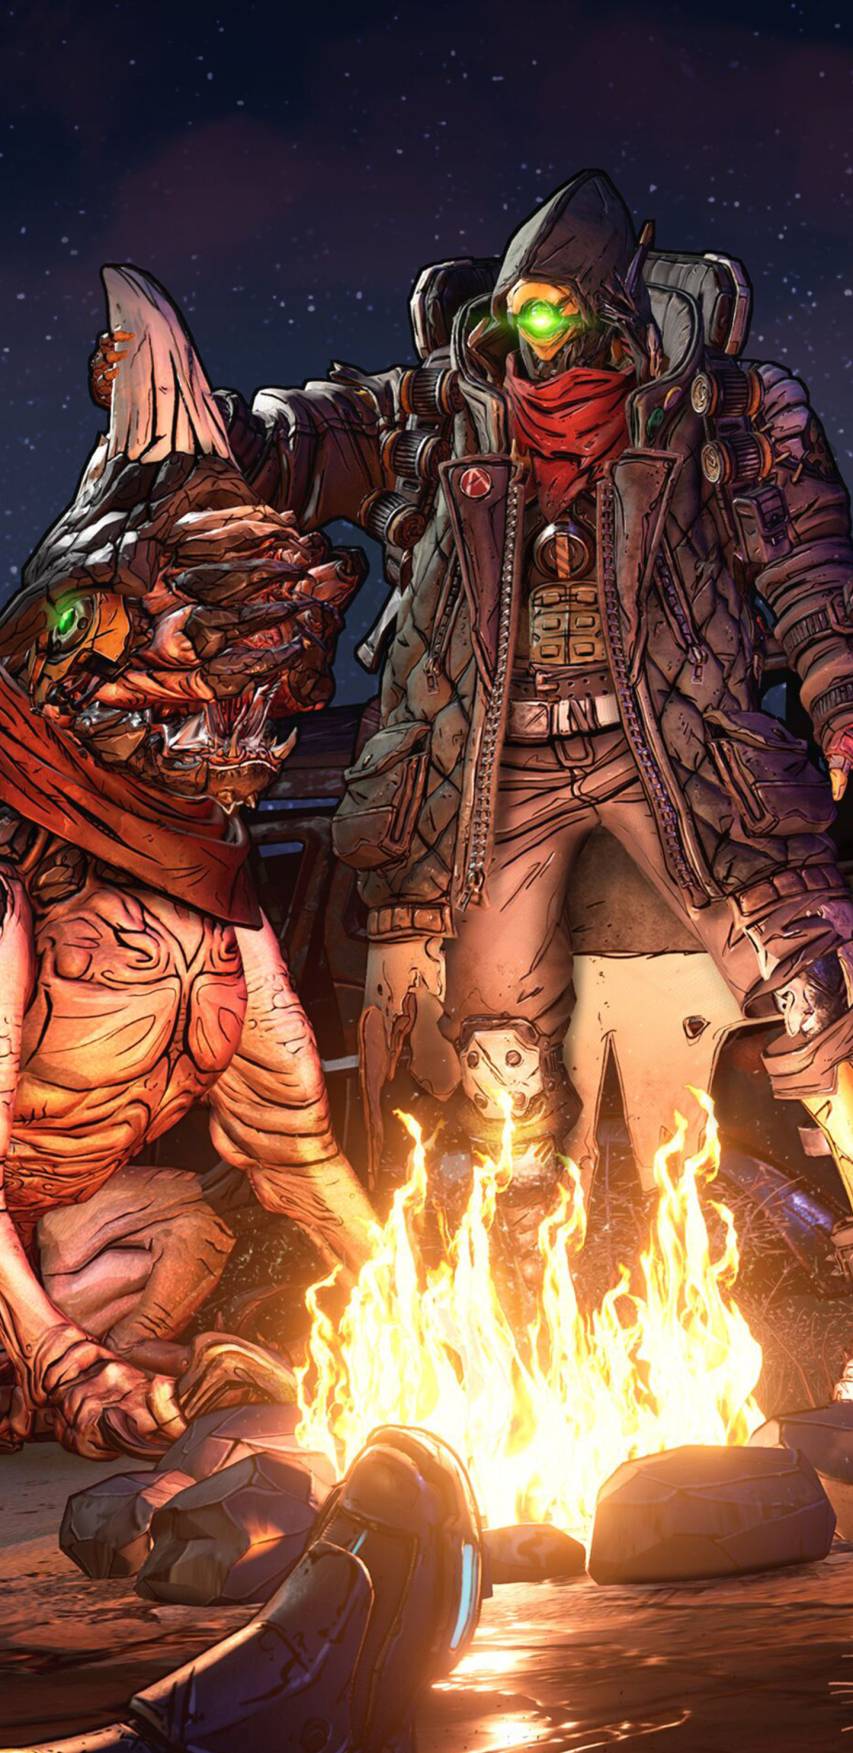 Cool Borderlands 3 Backgrounds image for Android Phones